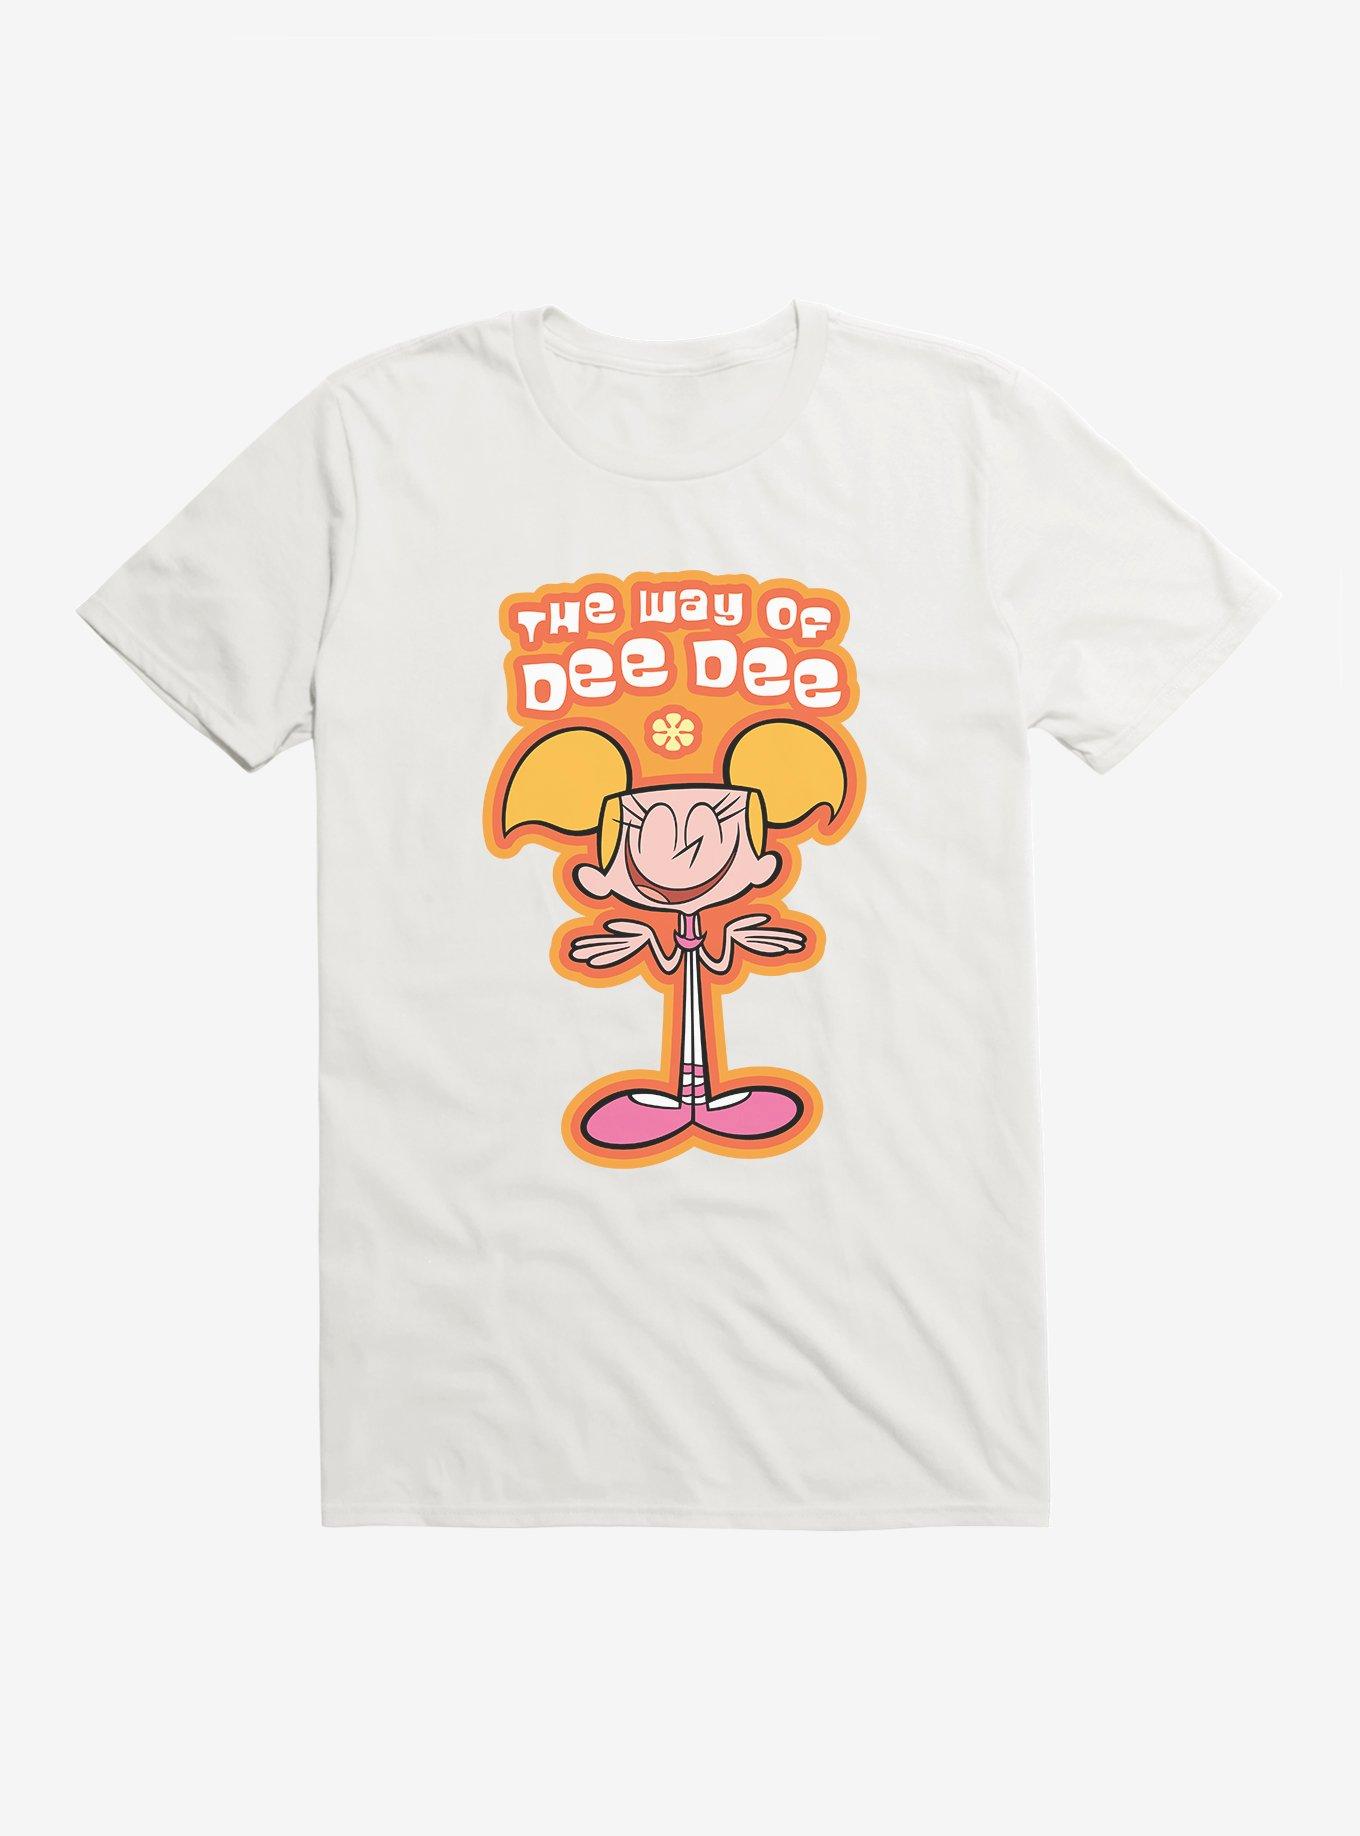 Dexter's Laboratory The Way Of Dee Dee T-Shirt | BoxLunch